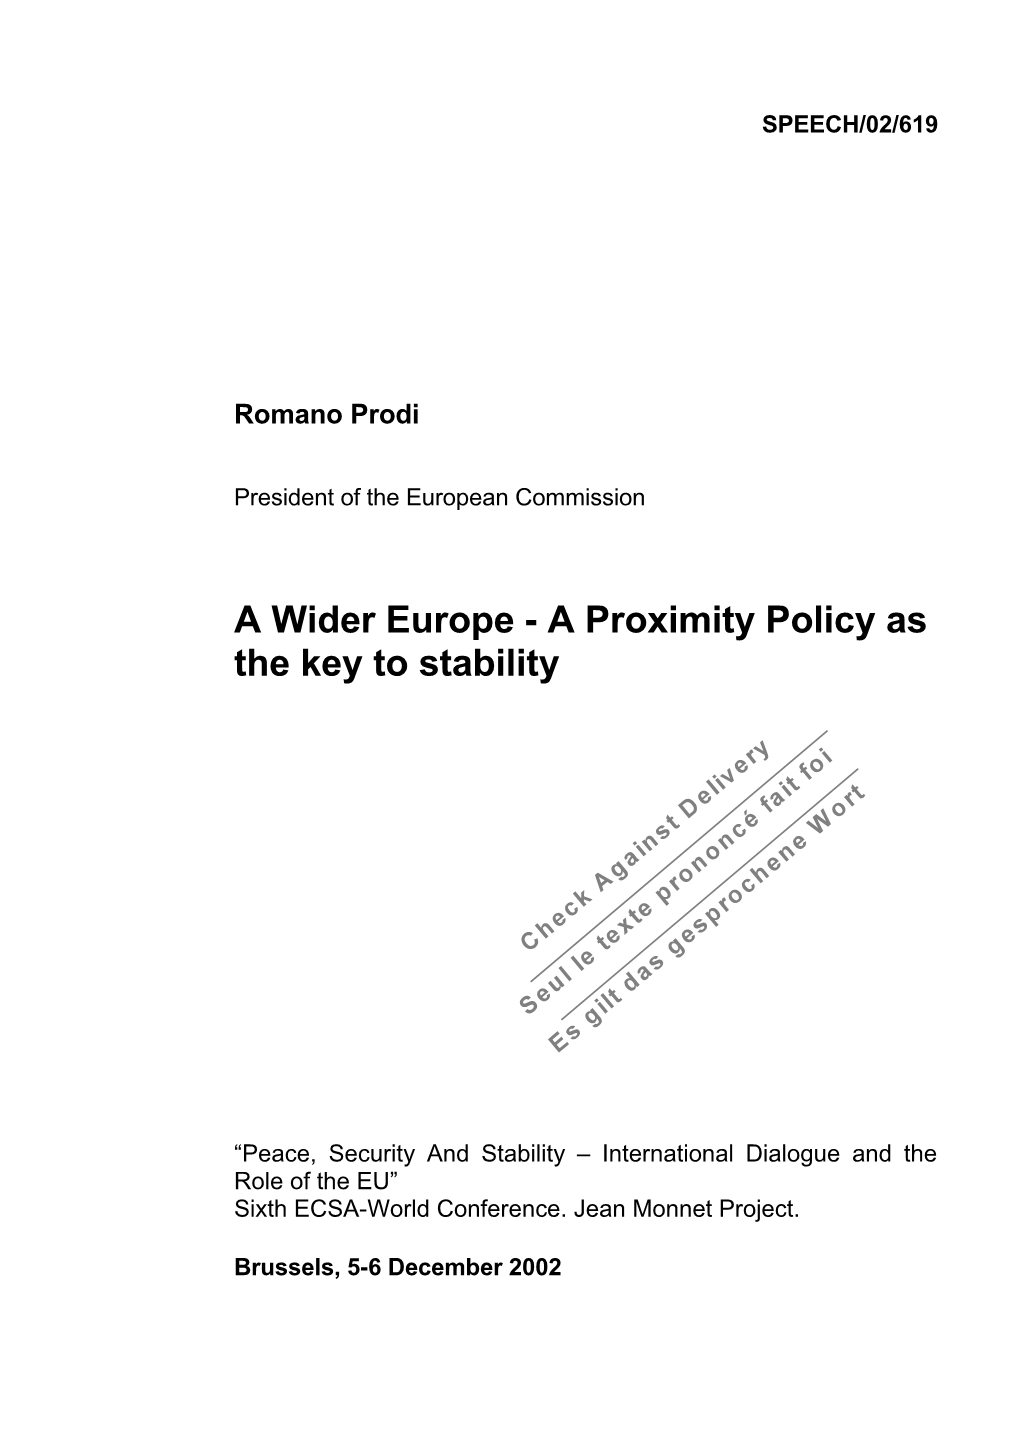 A Wider Europe - a Proximity Policy As the Key to Stability